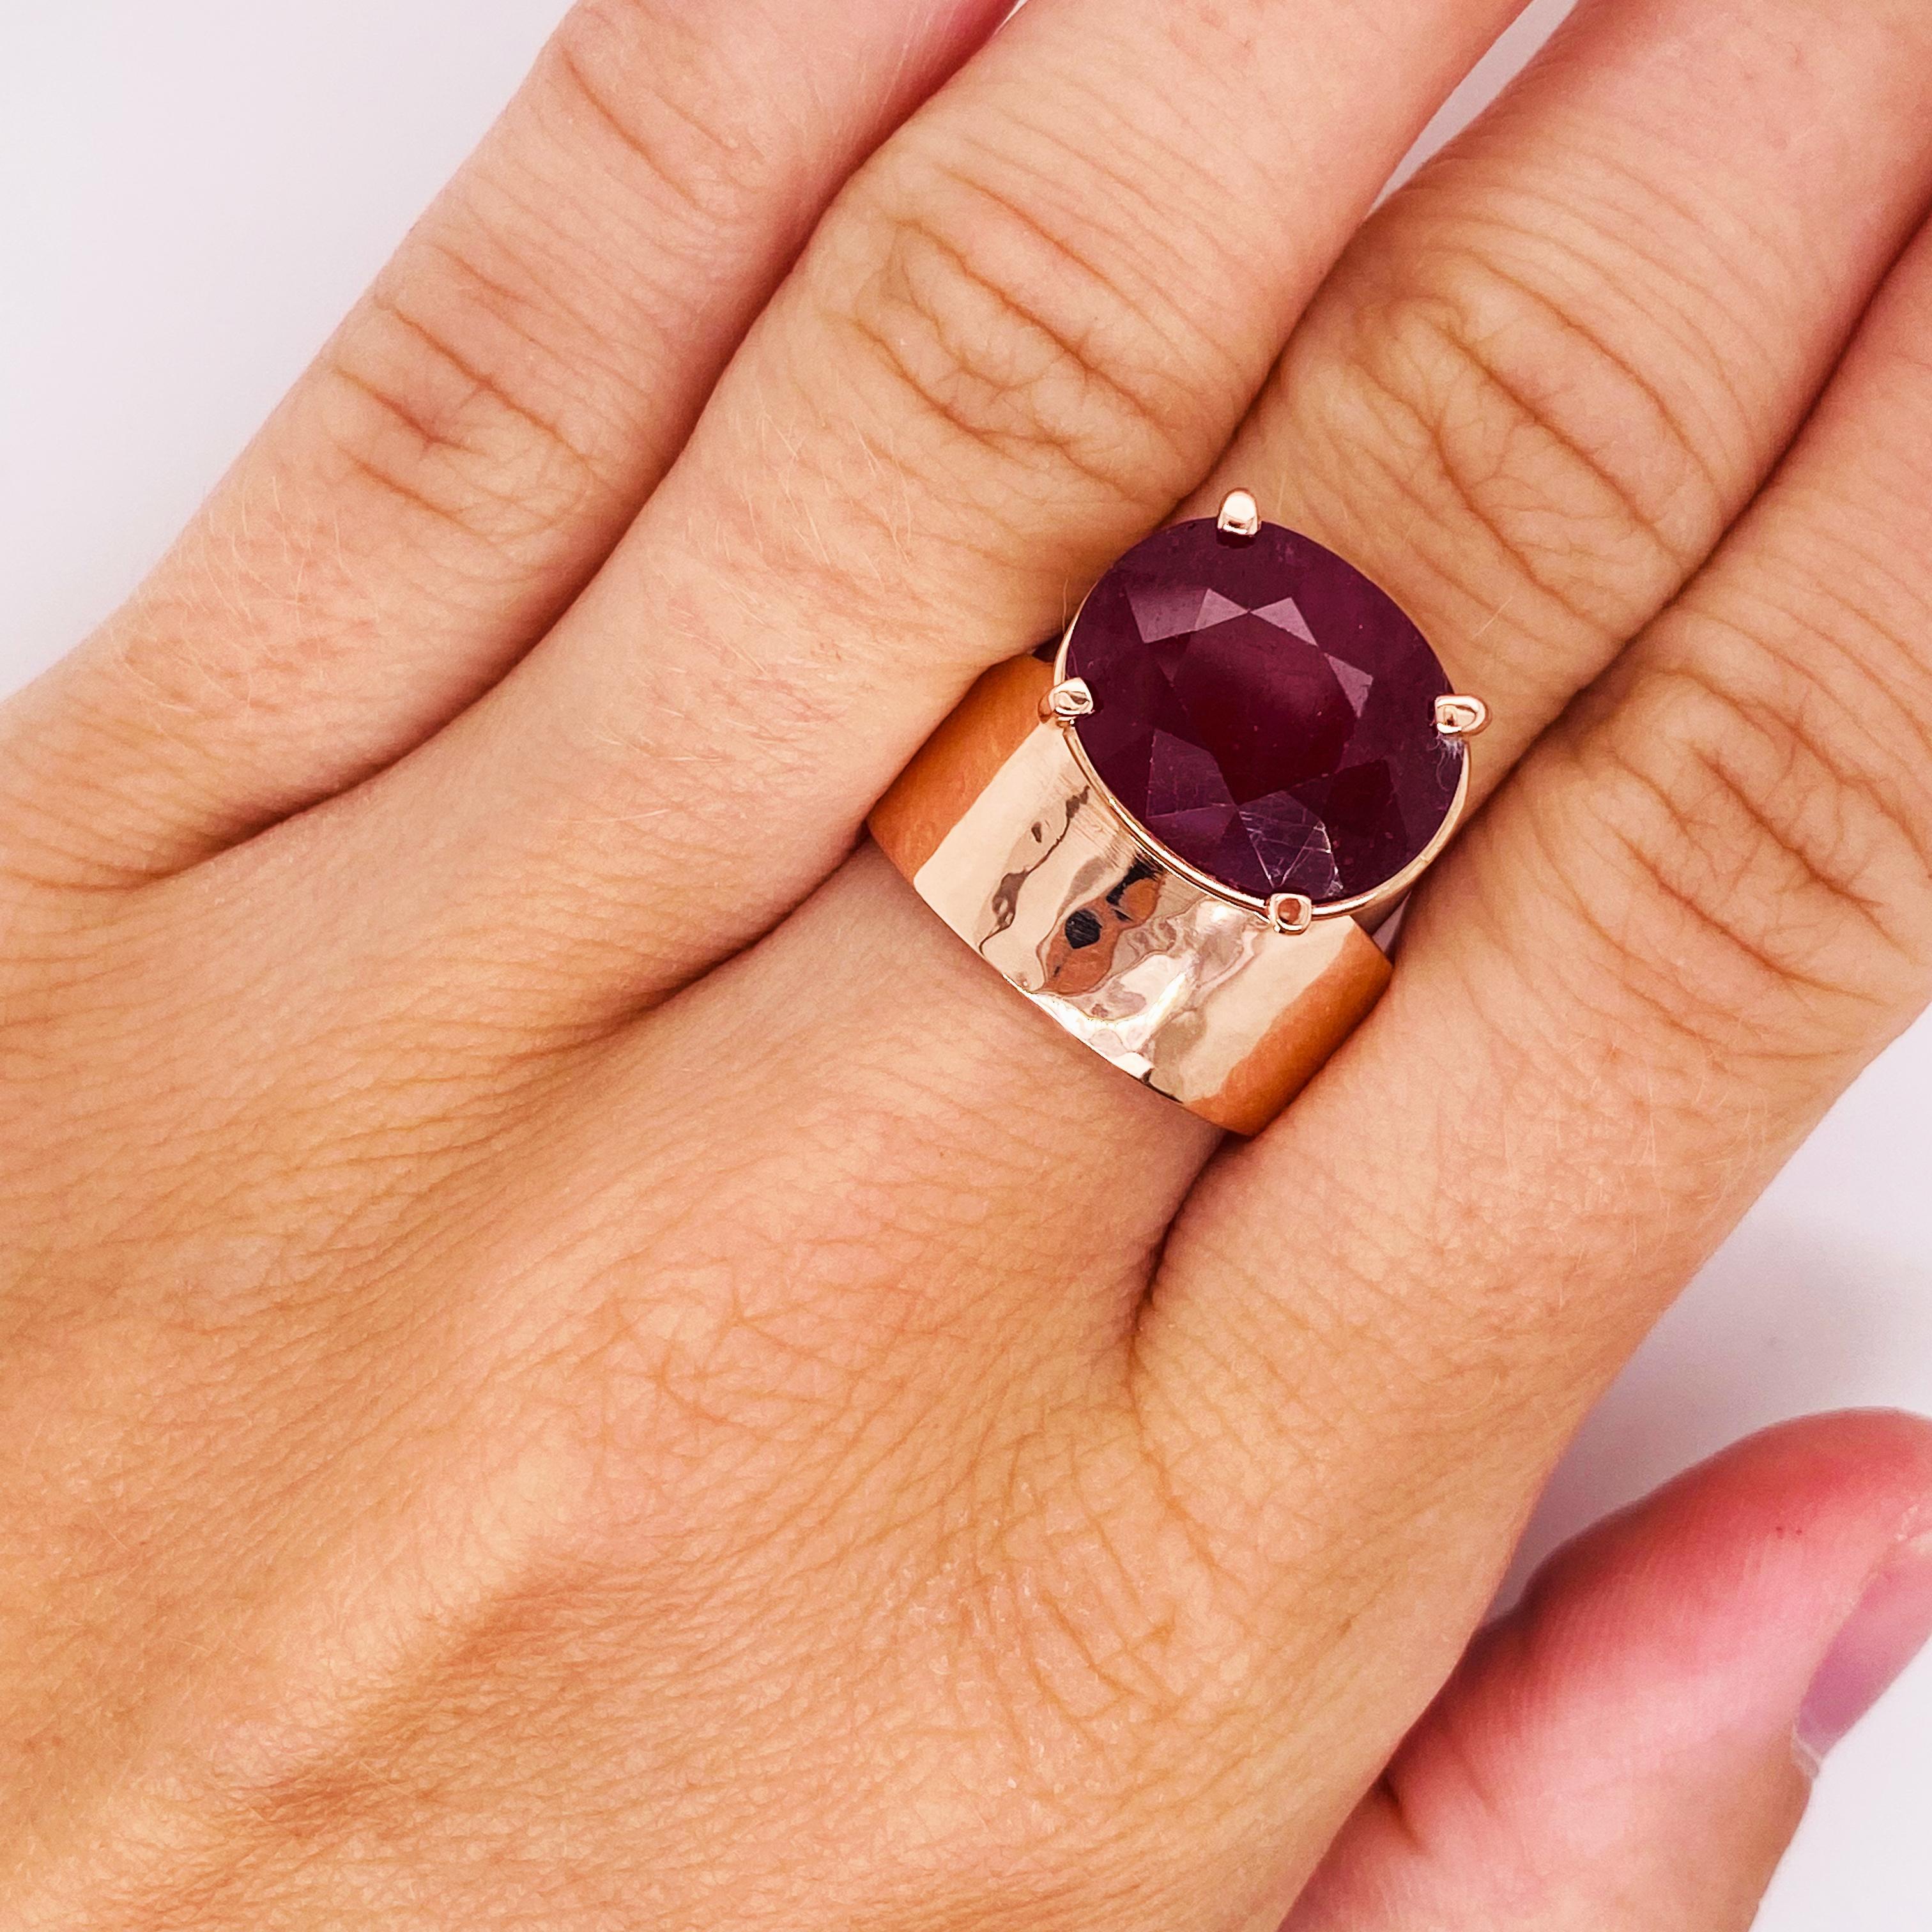 Huge Ruby-12.26 carats is the centerpiece of this beautiful 14 karat rose gold ring! Mary Rupert designed this ring to be unique and different! The pink of the 14k rose gold is perfect with the red of the ruby. Mary Rupert is a Graduate Gemologist